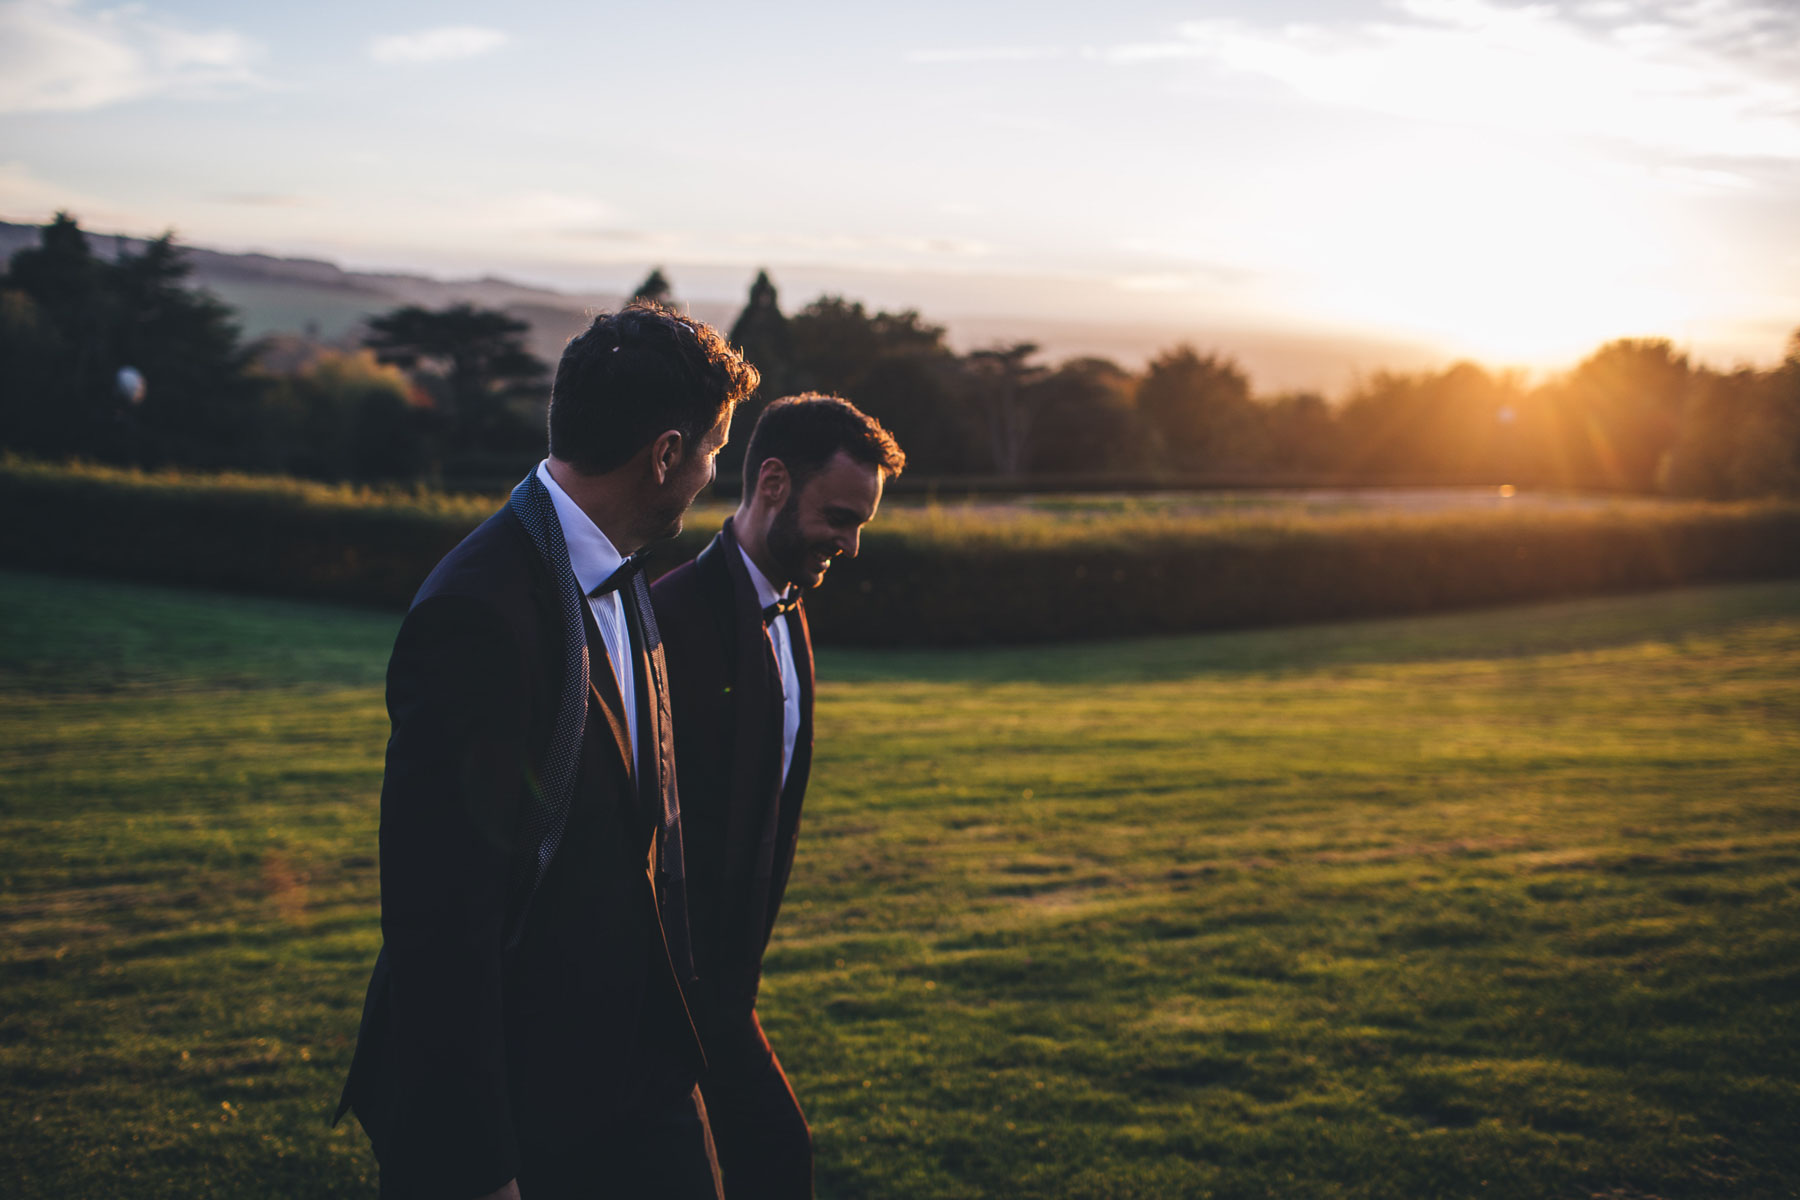 two grooms take a walk together during a golden sunset